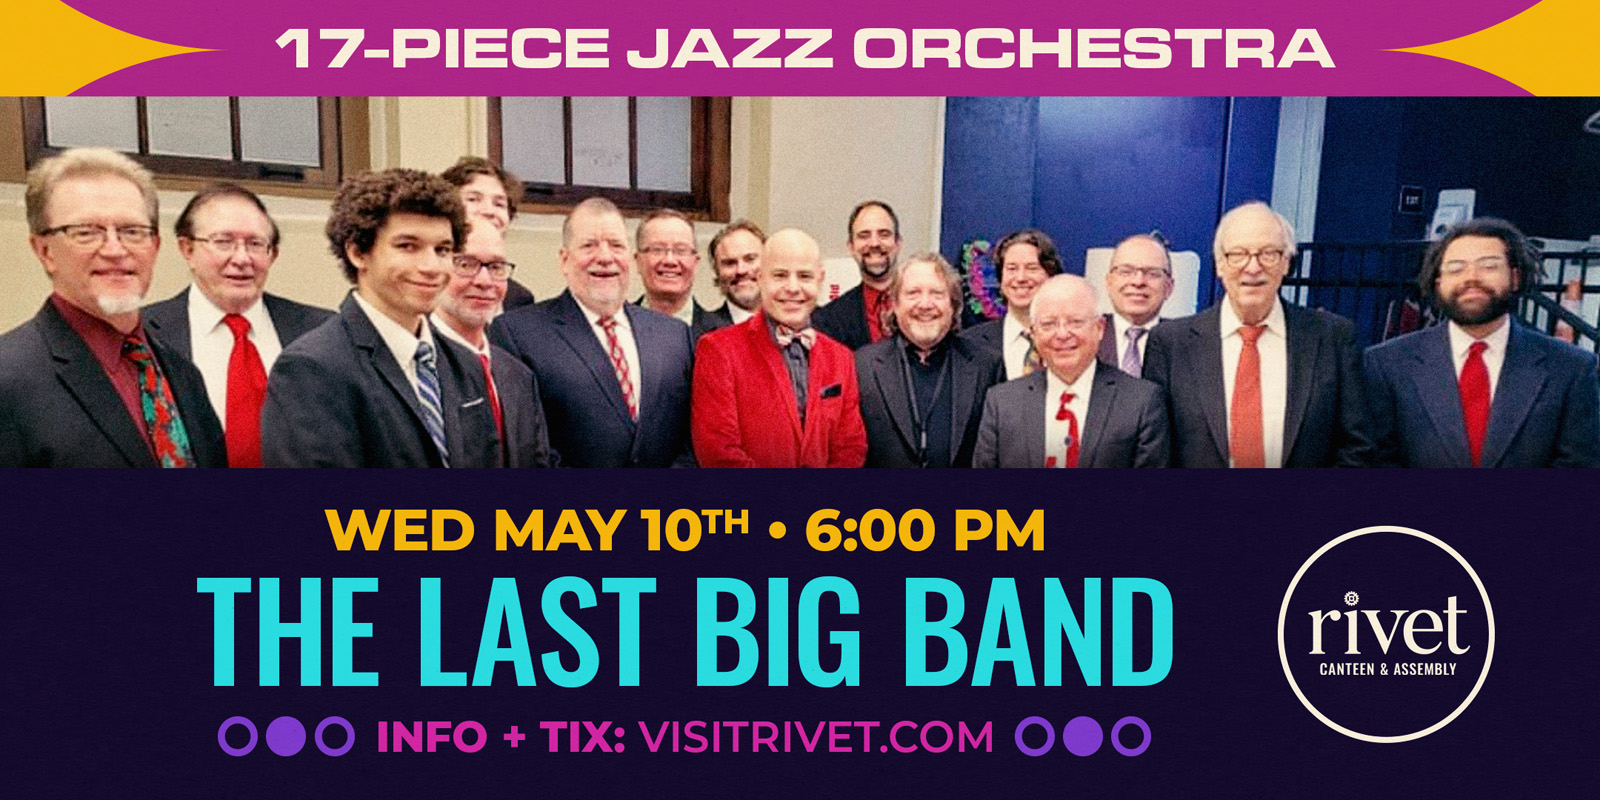 The Last Big Band performing live at Rivet: Canteen & Assembly on Wednesday, May 10th, 2023. Join us!